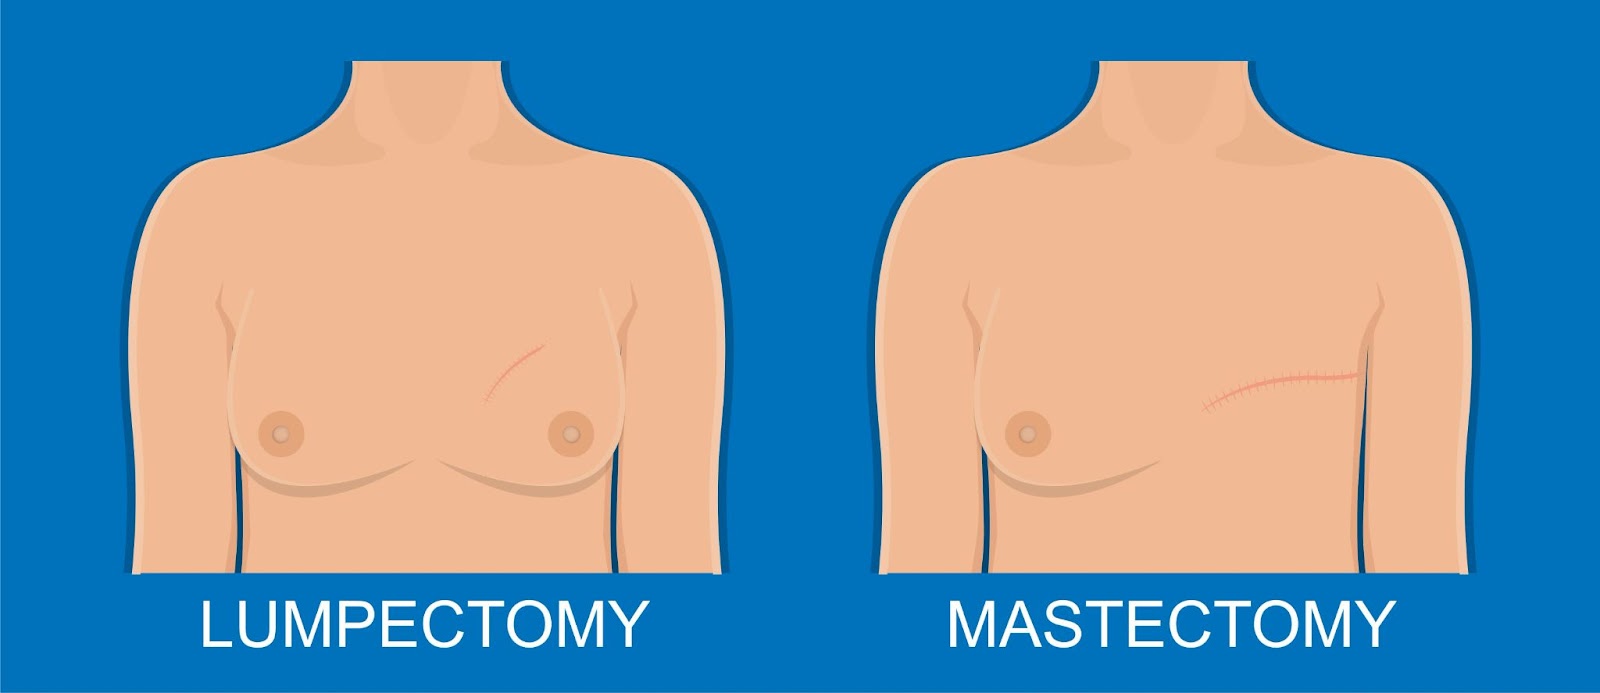 Lumpectomy vs. Mastectomy: Side-by-Side Comparison